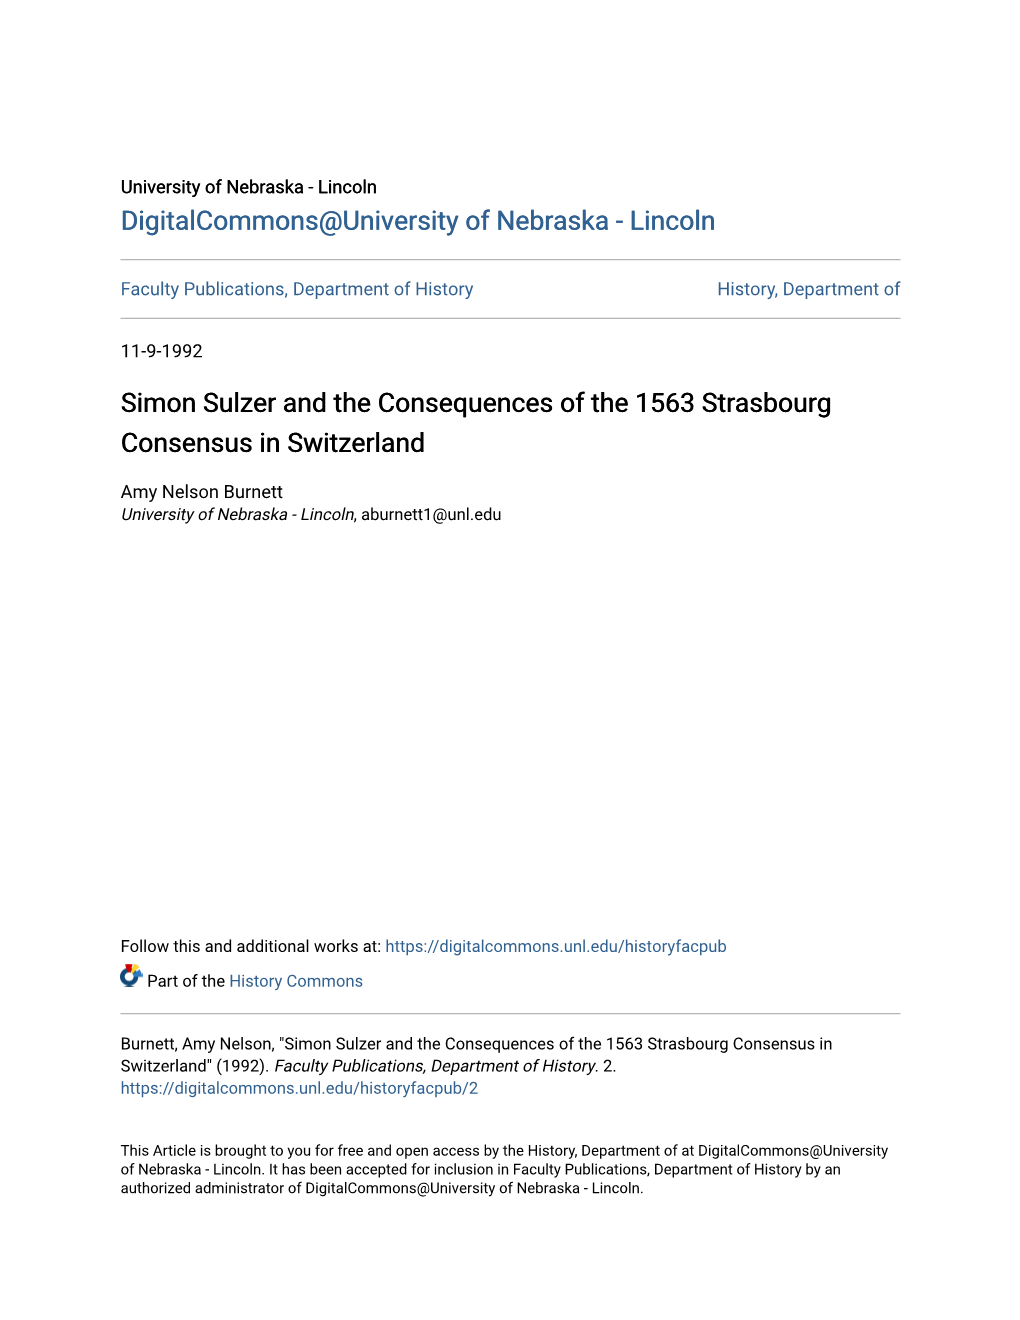 Simon Sulzer and the Consequences of the 1563 Strasbourg Consensus in Switzerland